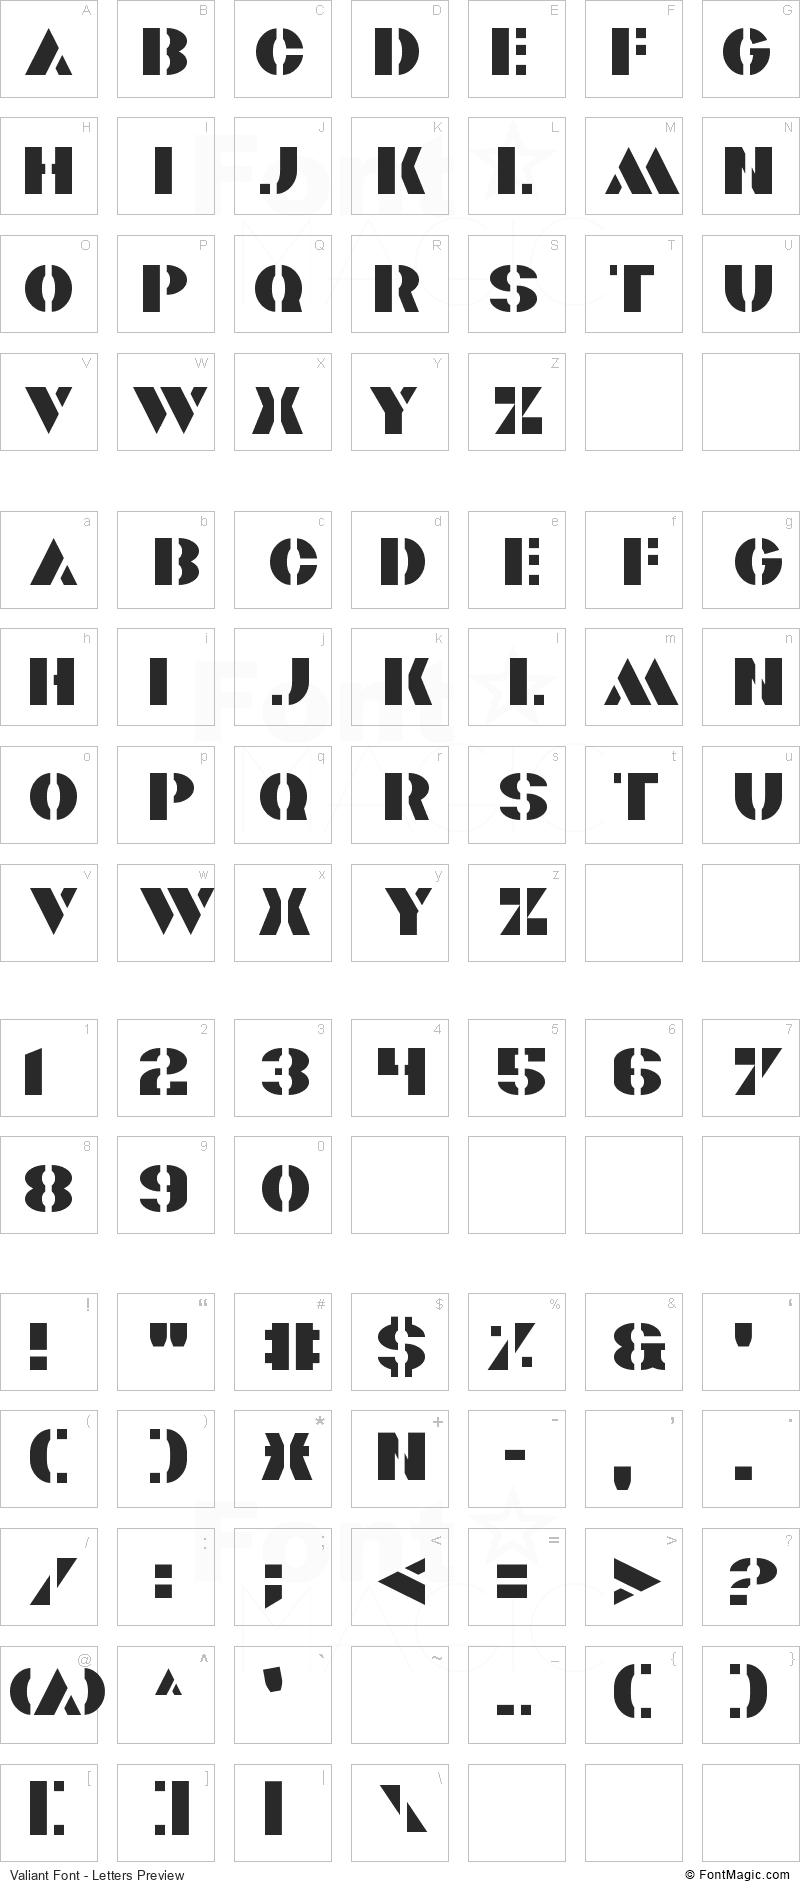 Valiant Font - All Latters Preview Chart